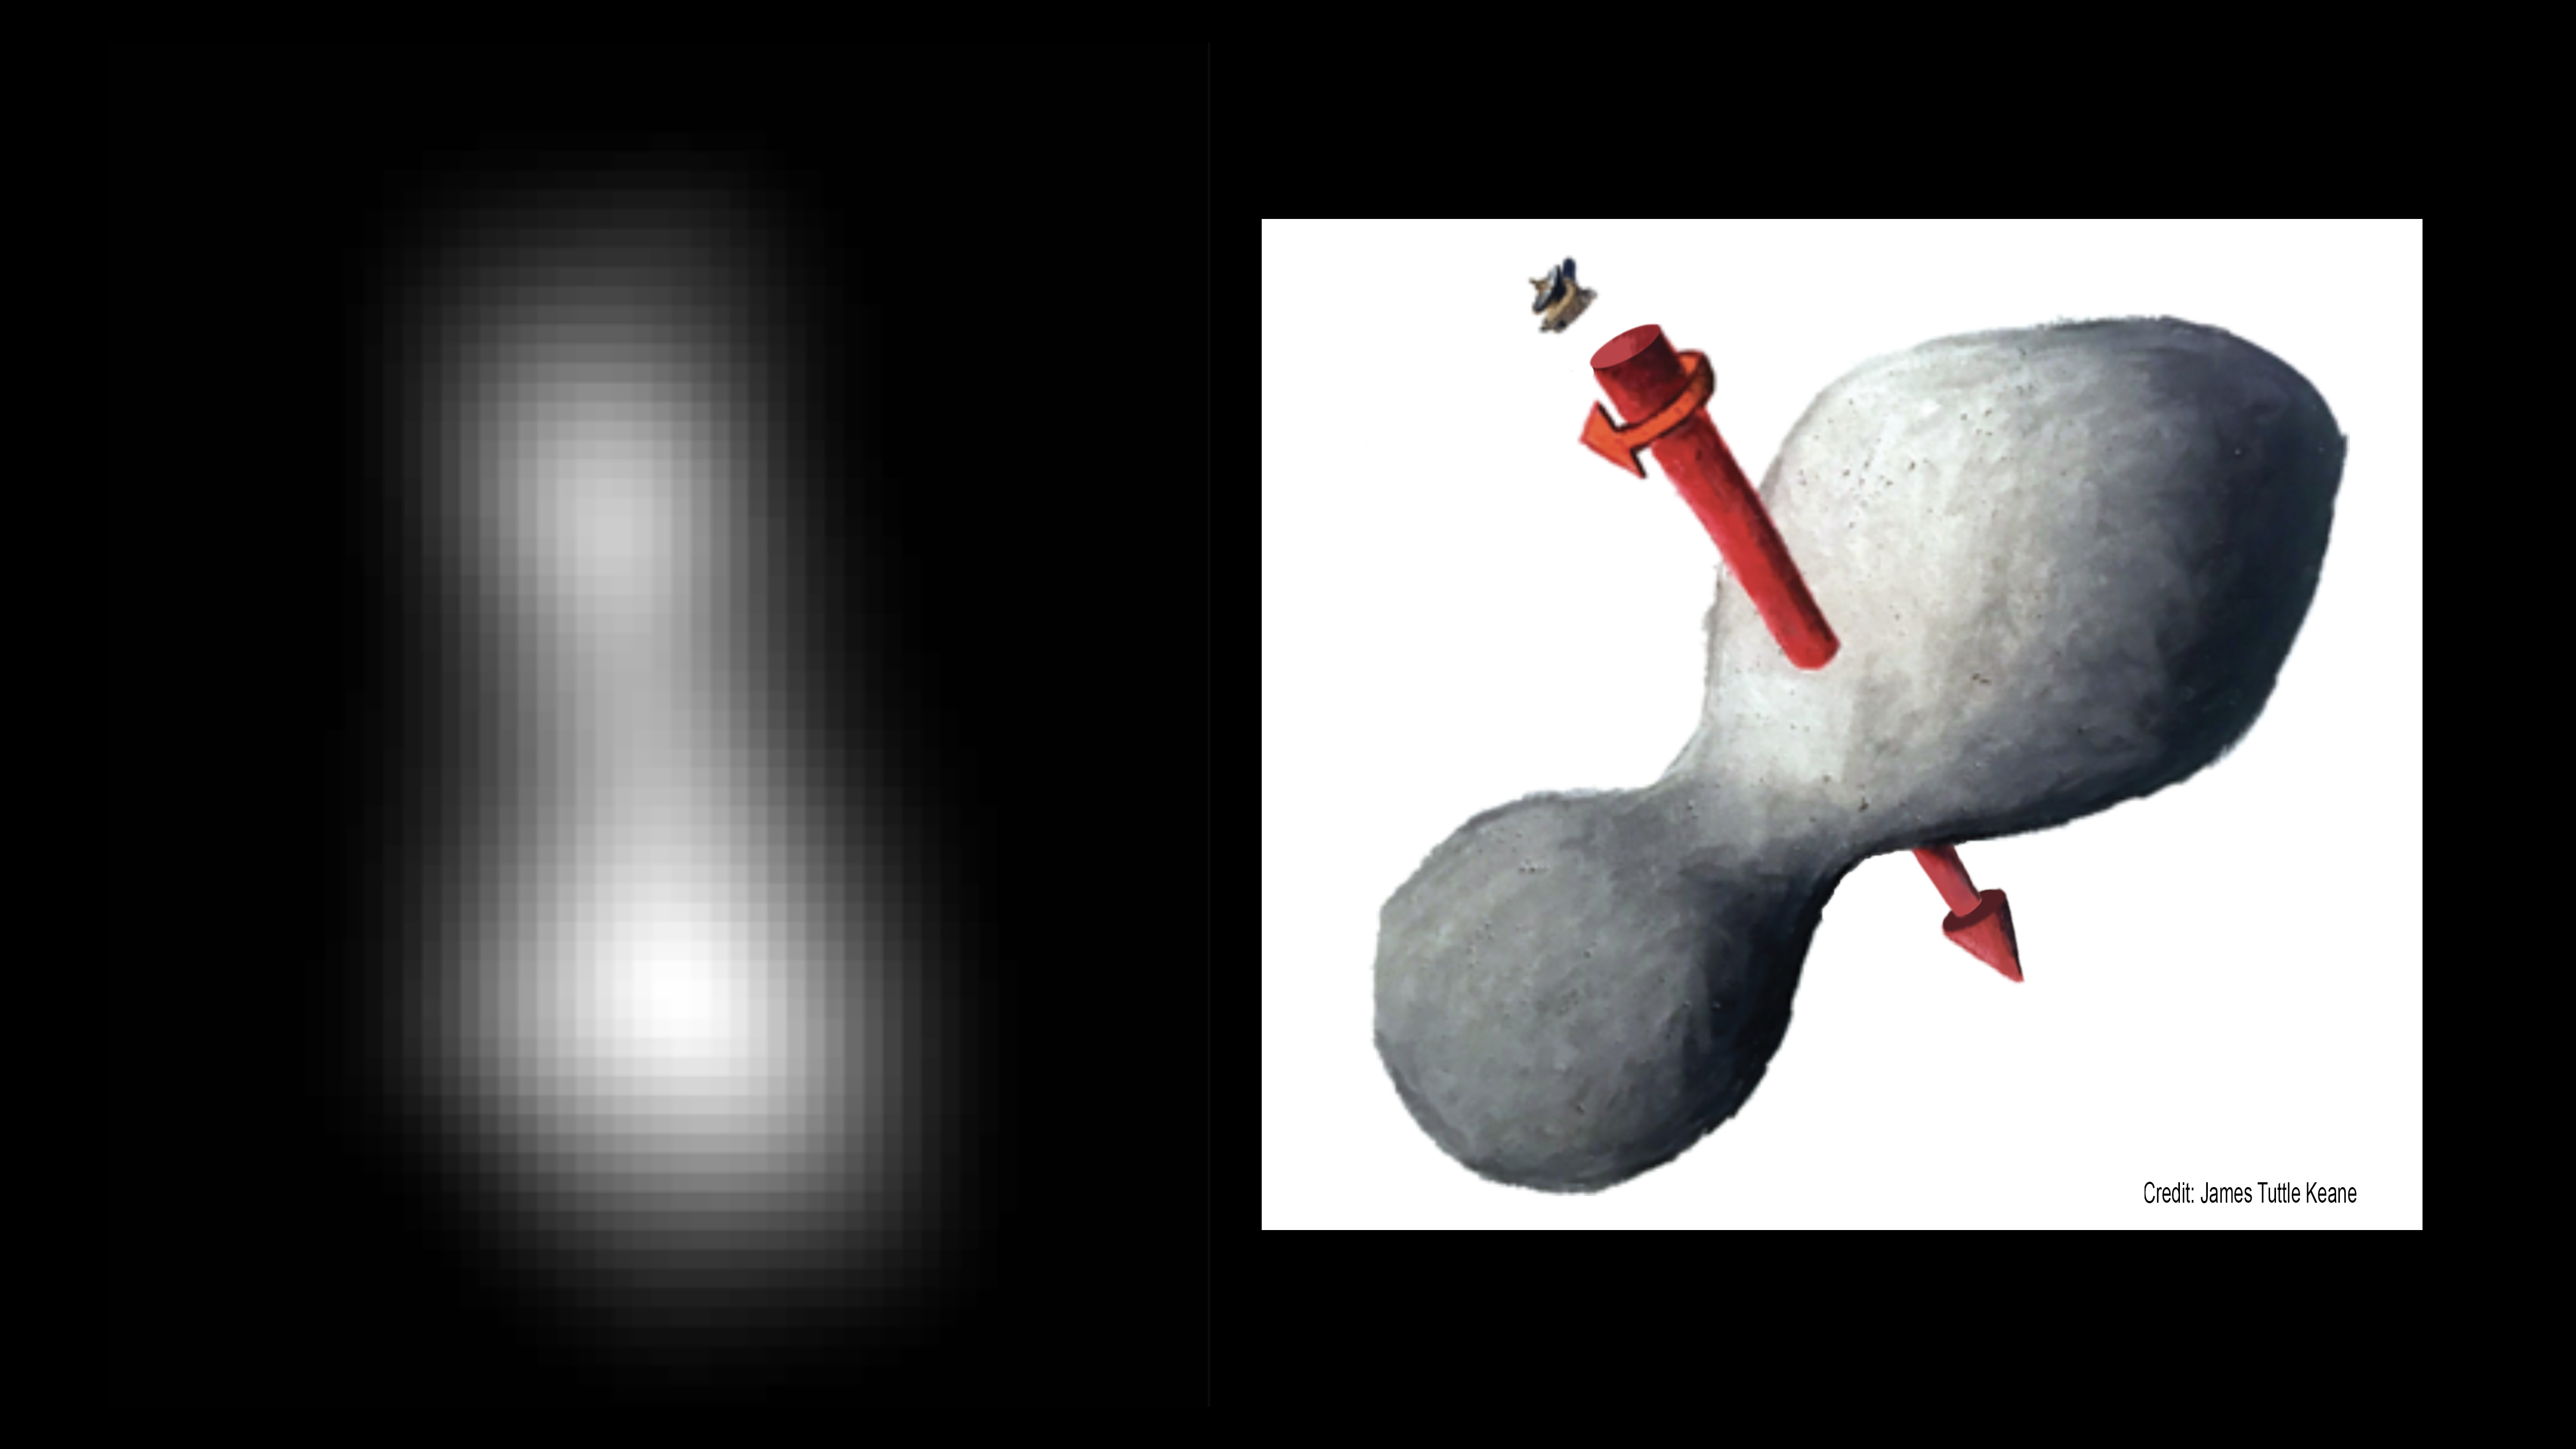 01 January 2019 image of Ultima Thule by New Horizons spacecraft and sketch of object and rotation courtesy James Tuttle Keane